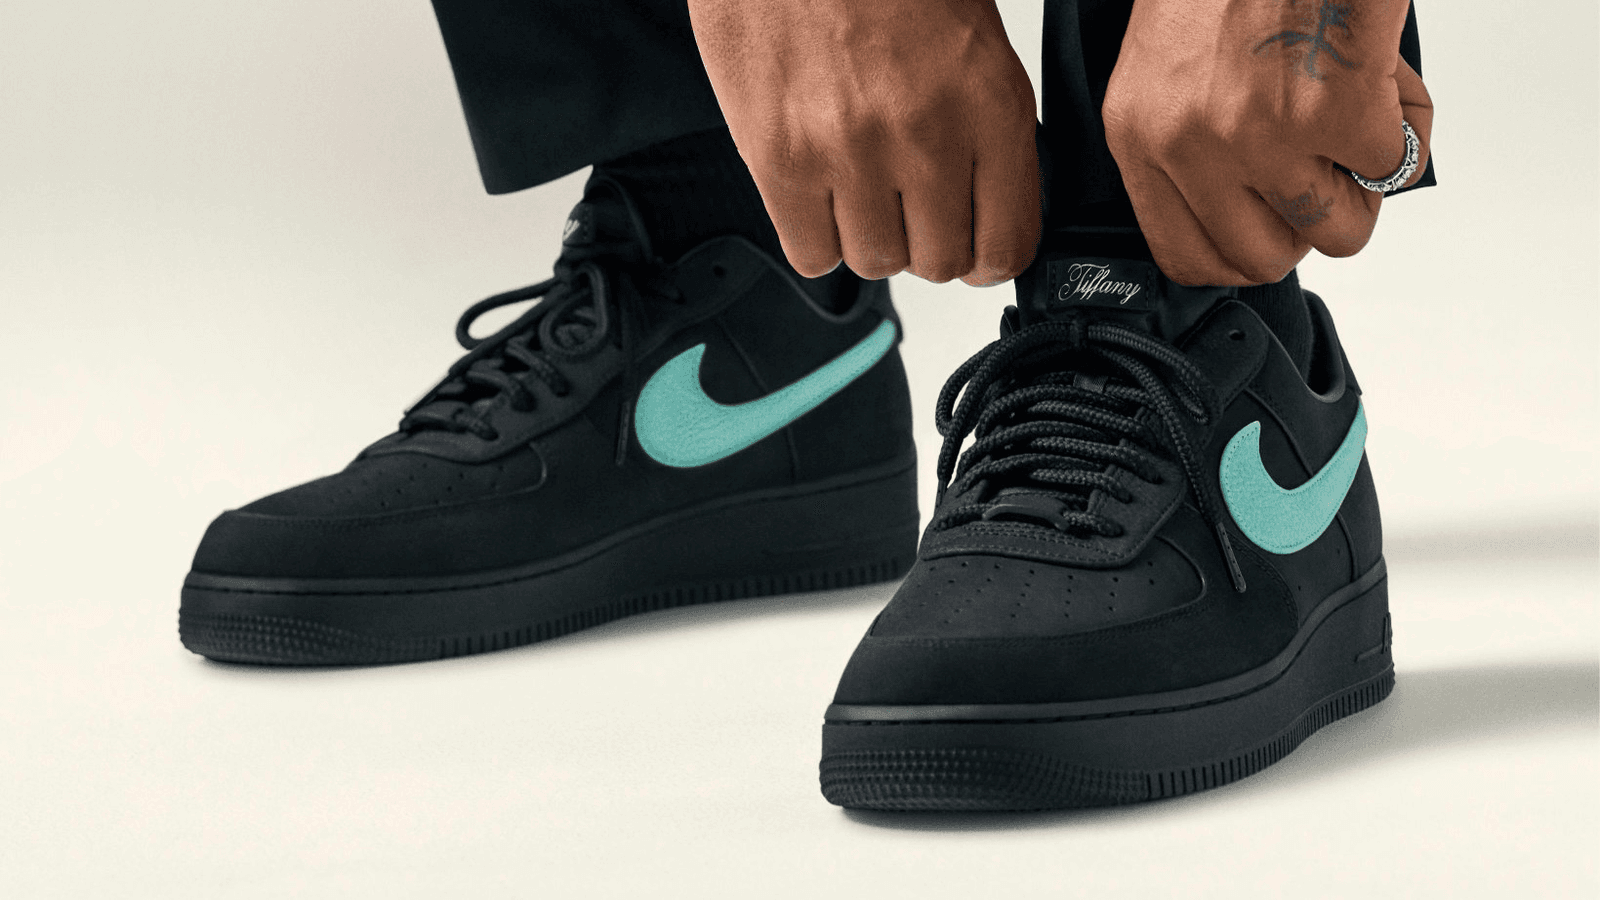 How to Get Your Hands on the Coveted Nike x Tiffany & Co. Air Force 1 1837